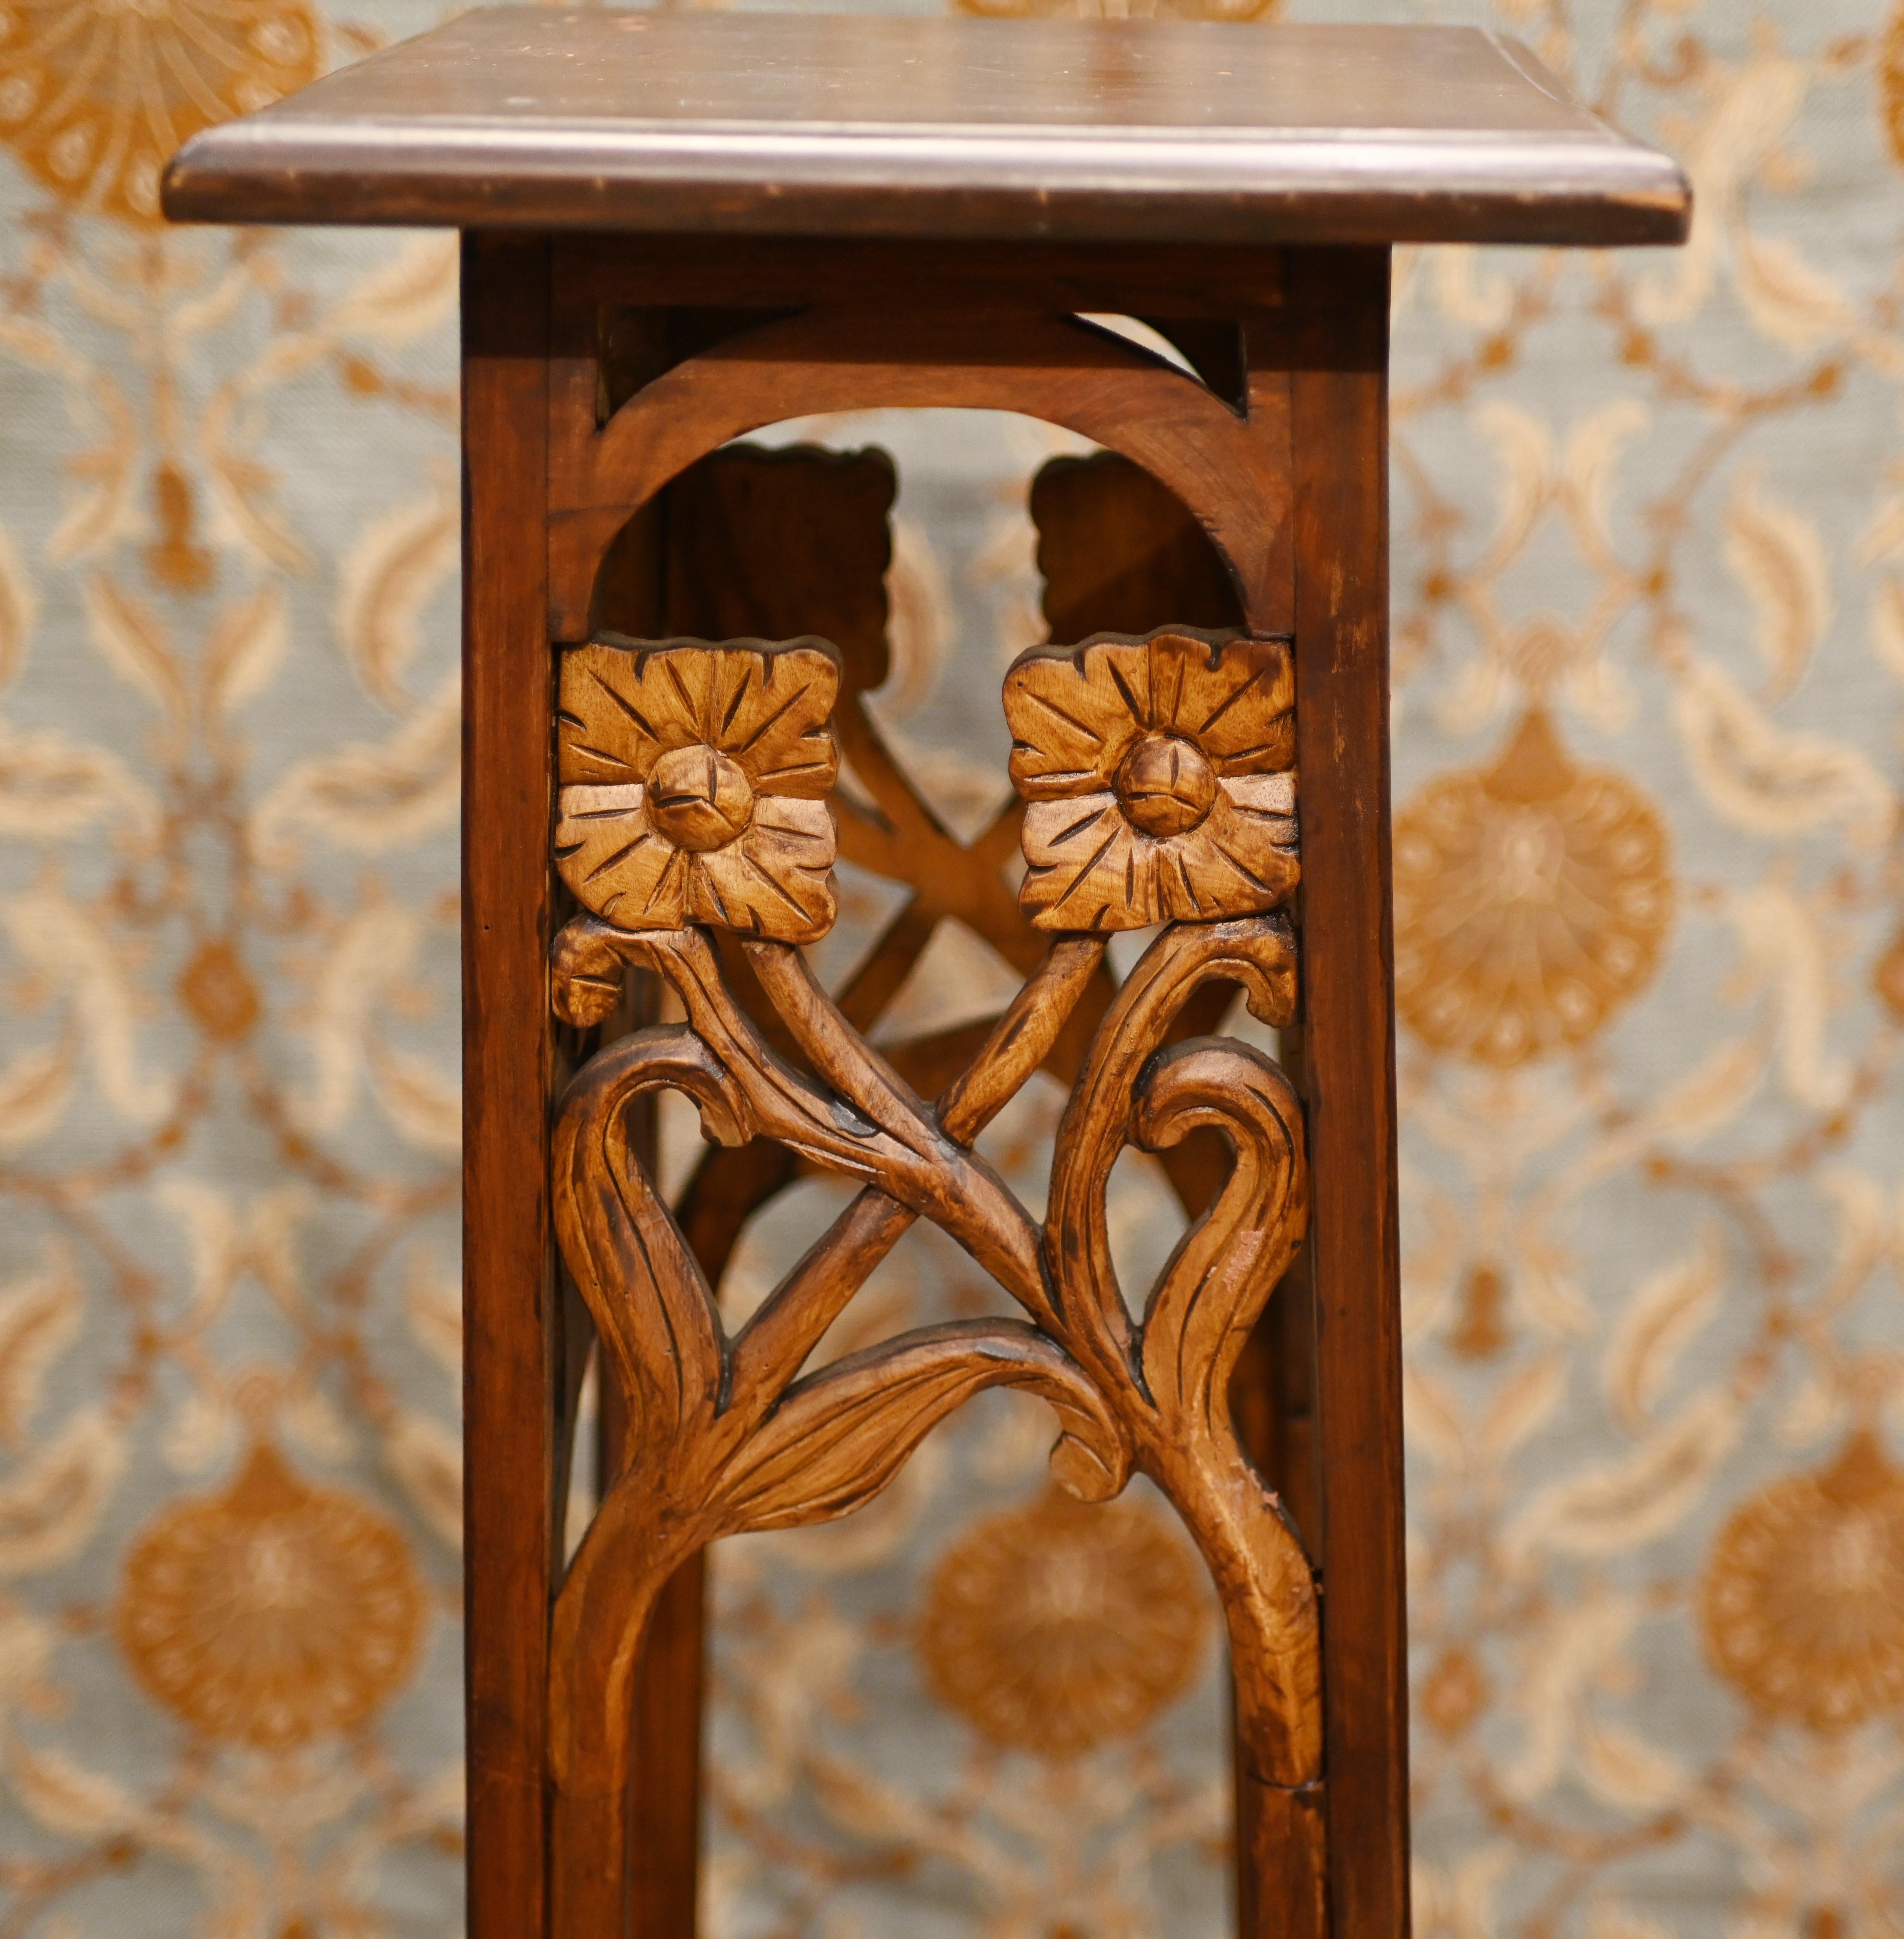 Early 20th Century Art Nouveau Pedestal Stand Table 1910